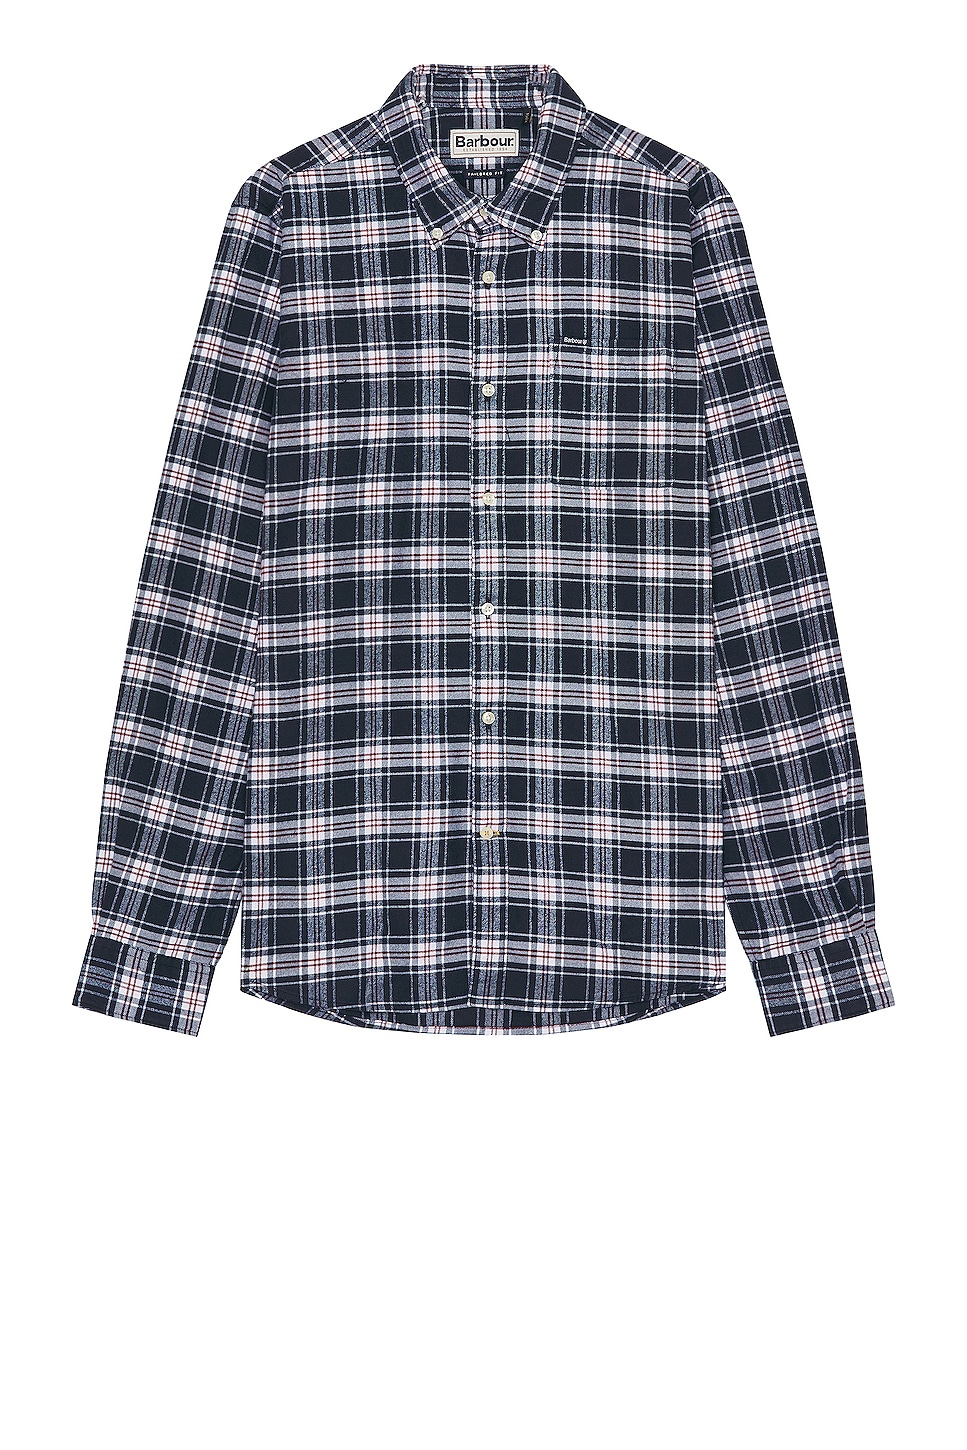 Image 1 of Barbour Langton Tailored Shirt in Navy